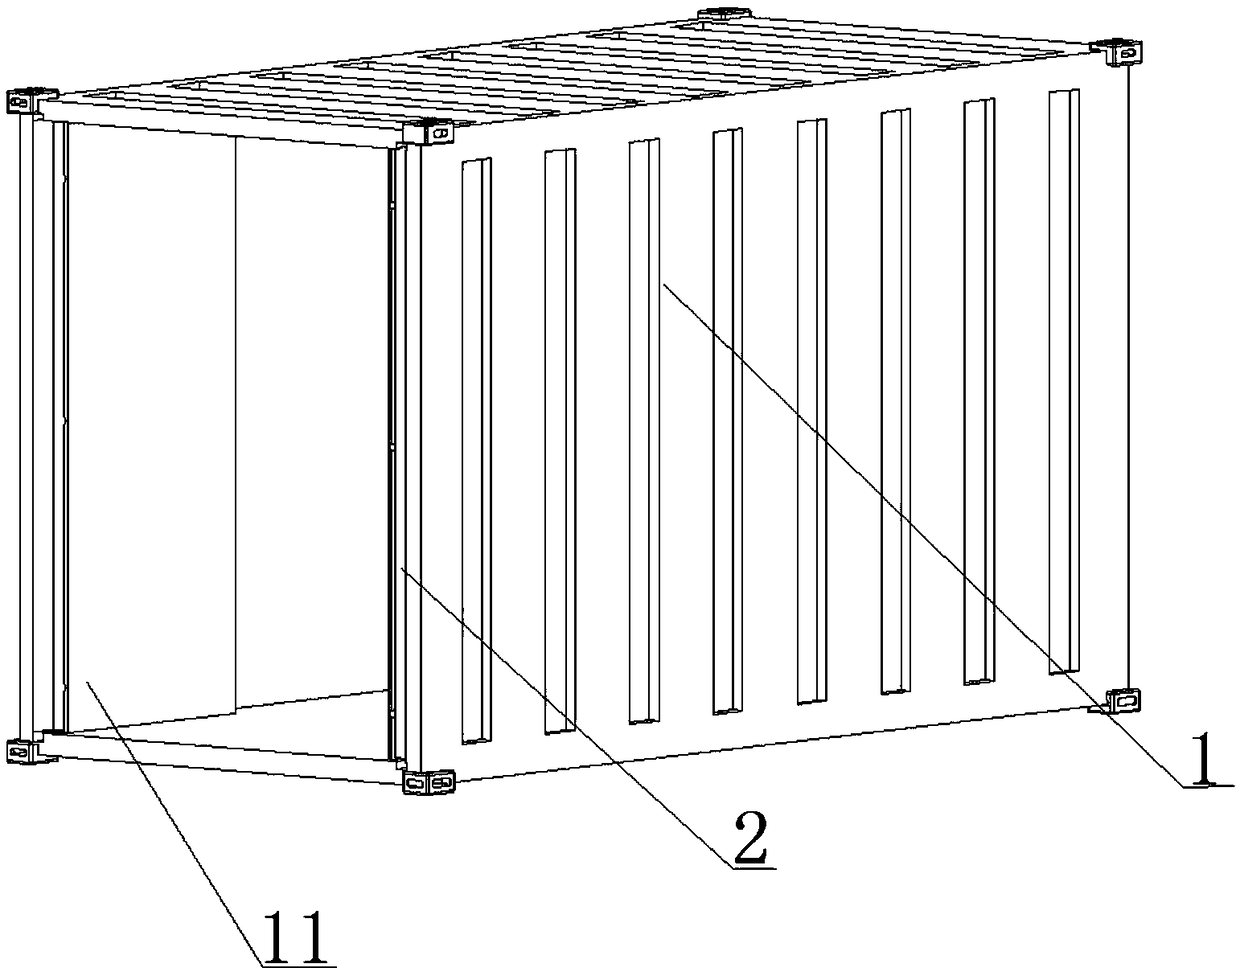 Container with box doors capable of contracting into box body